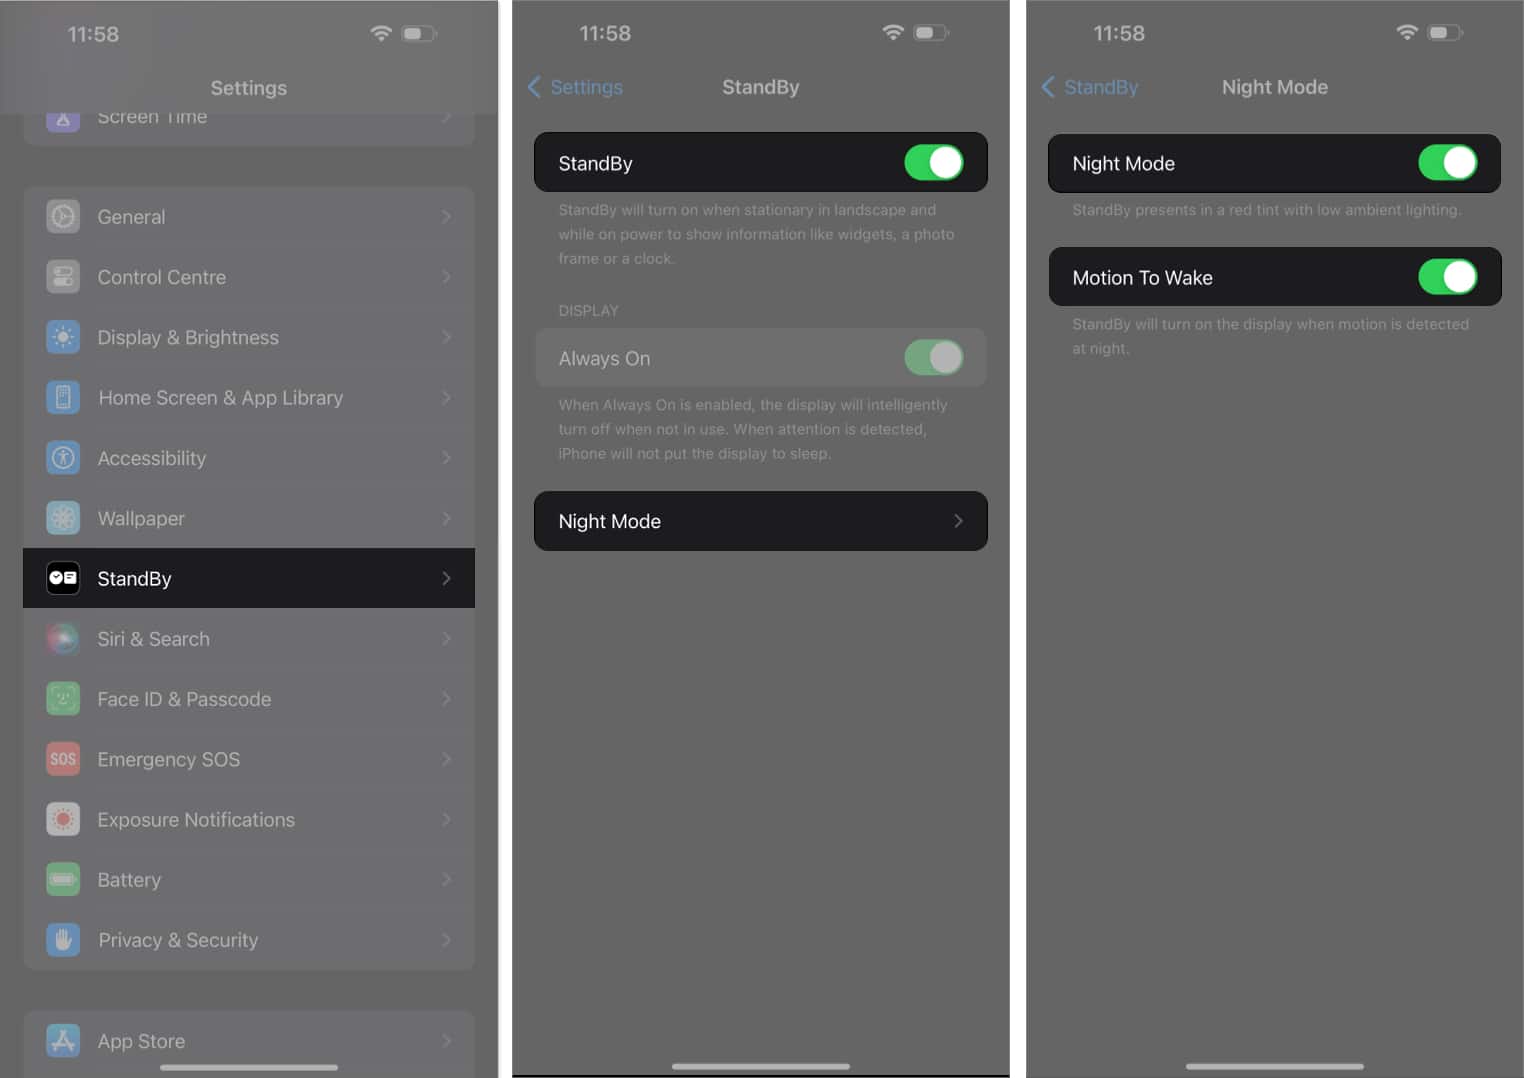 Tap stand by, toggle on stand by, tap night mode, toggle on night mode and motion to wake in settings